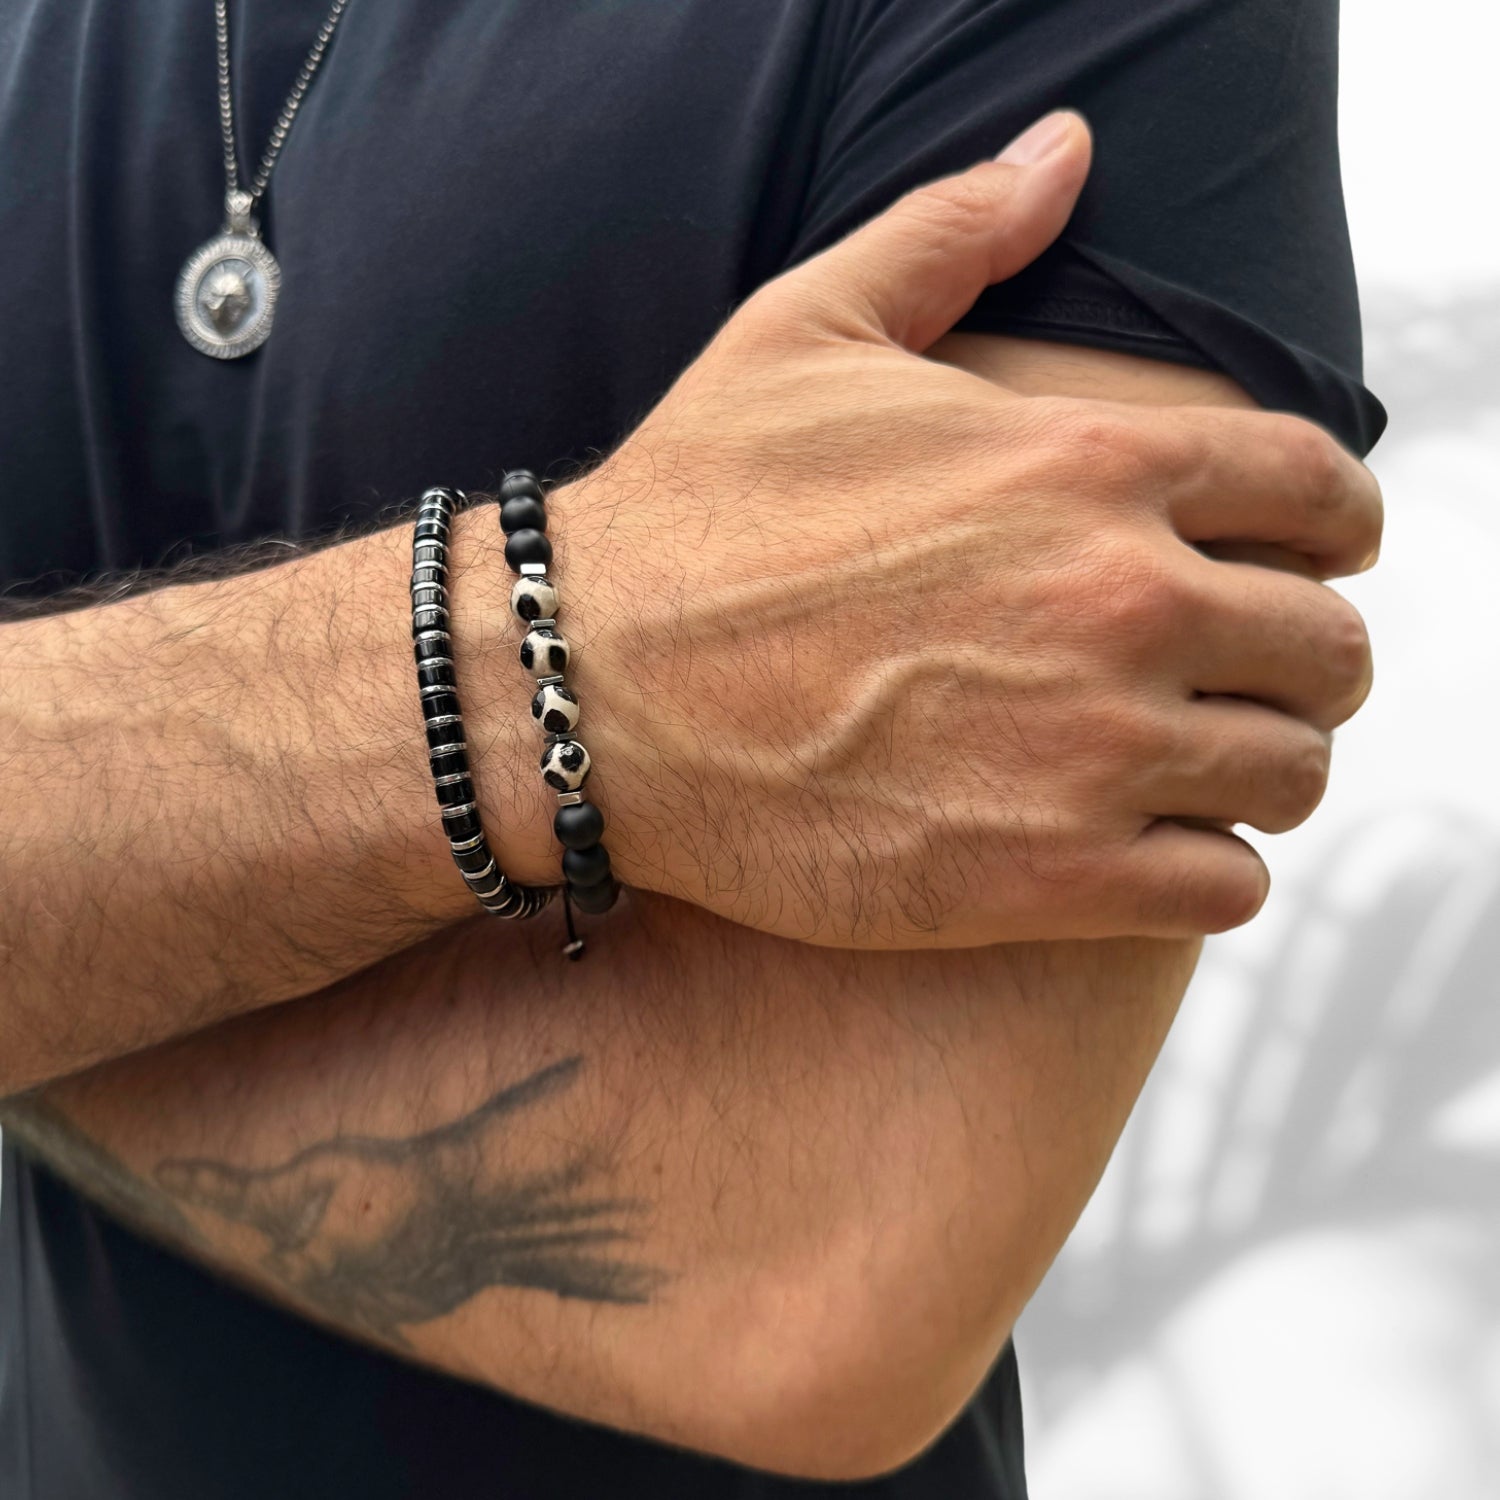 Handcrafted men's bracelet featuring black onyx stones and sleek silver hematite spacers for added elegance.